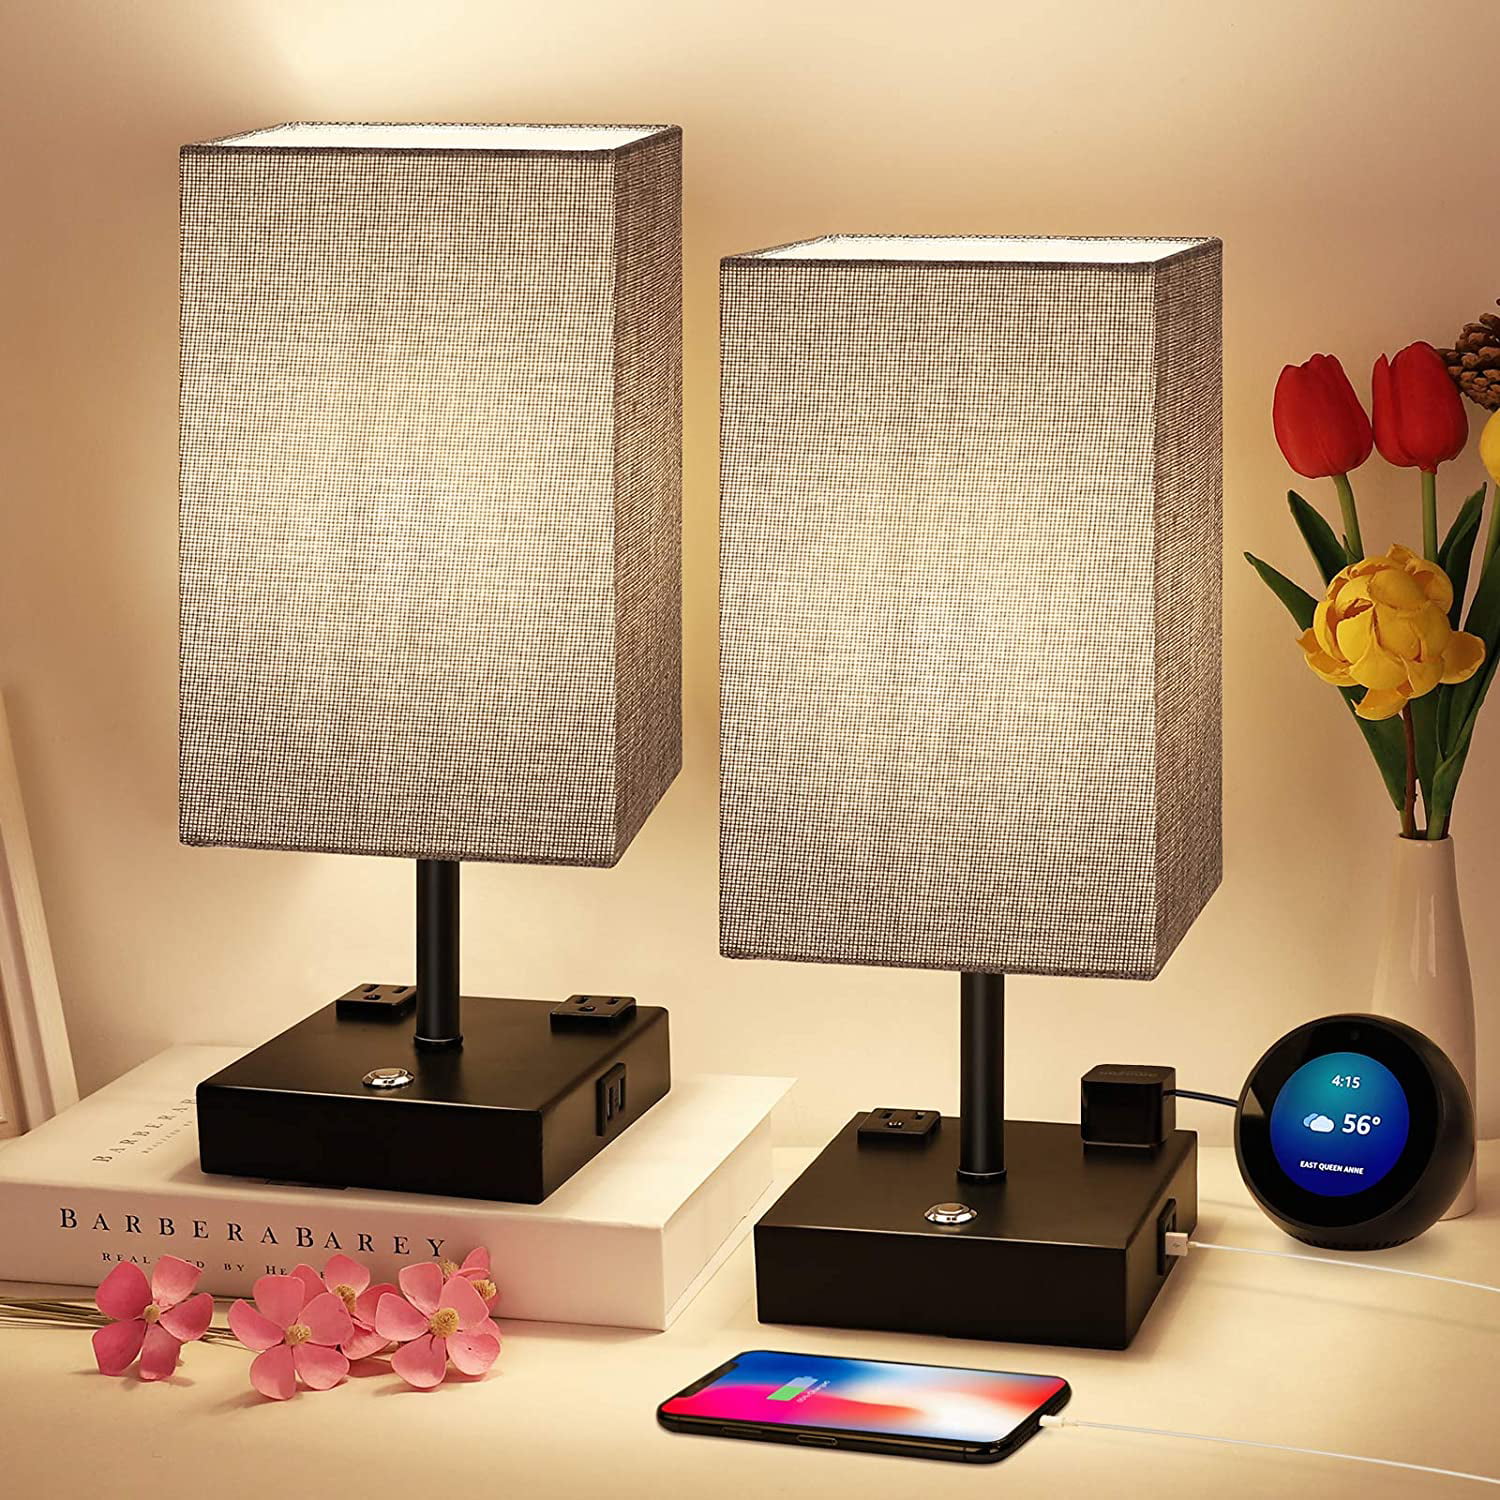 Small Table Lamp with Gold Lampshade for Nightstand Living Room Office Desk Bedside Lamp with USB Port and Outlet LED Bulb Included 3-Way Dimmable Touch Lamp with USB Charging Port for Bedroom 